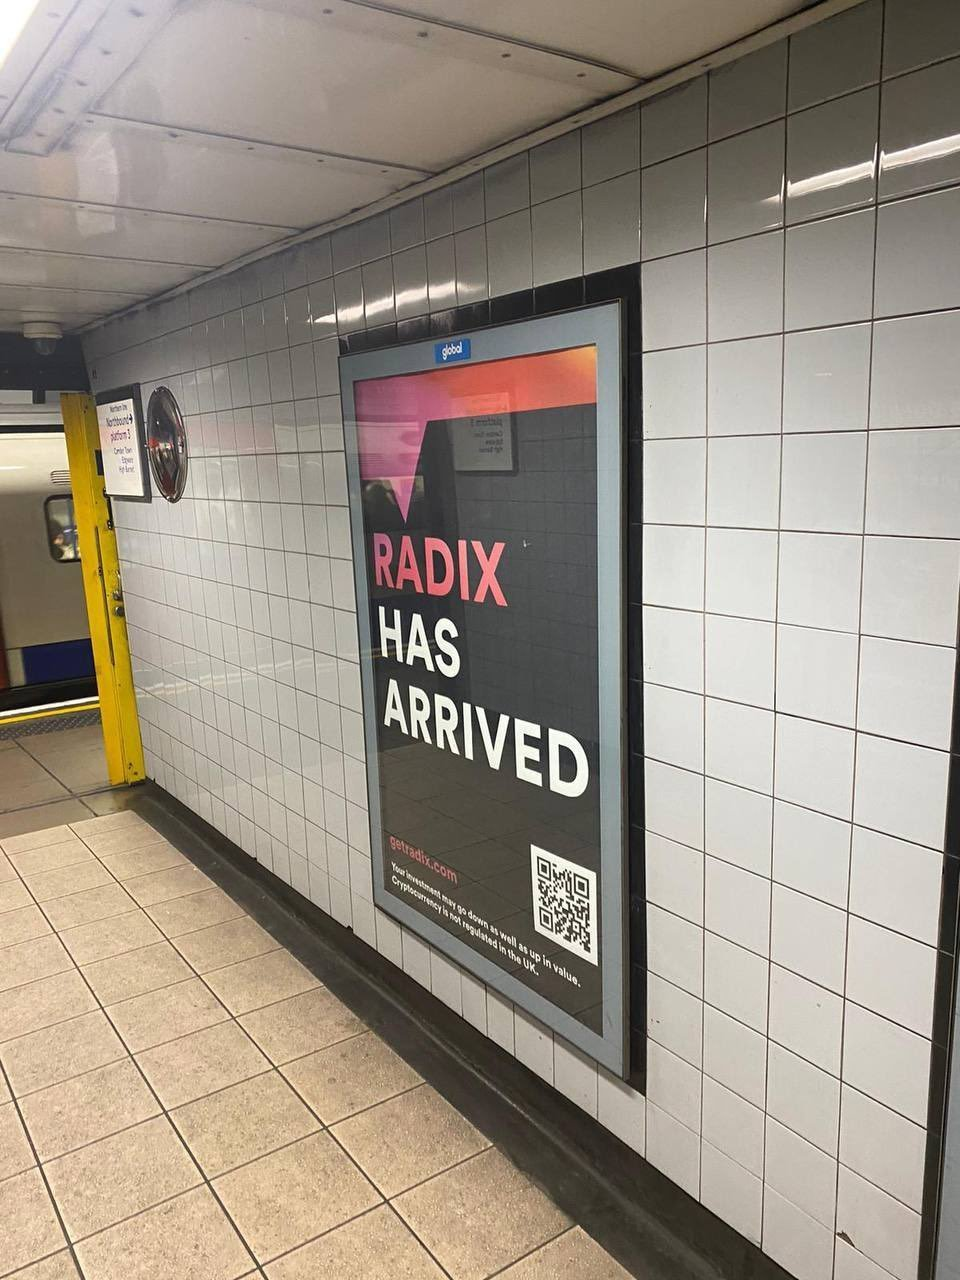 radix launches london wide advertising campaign